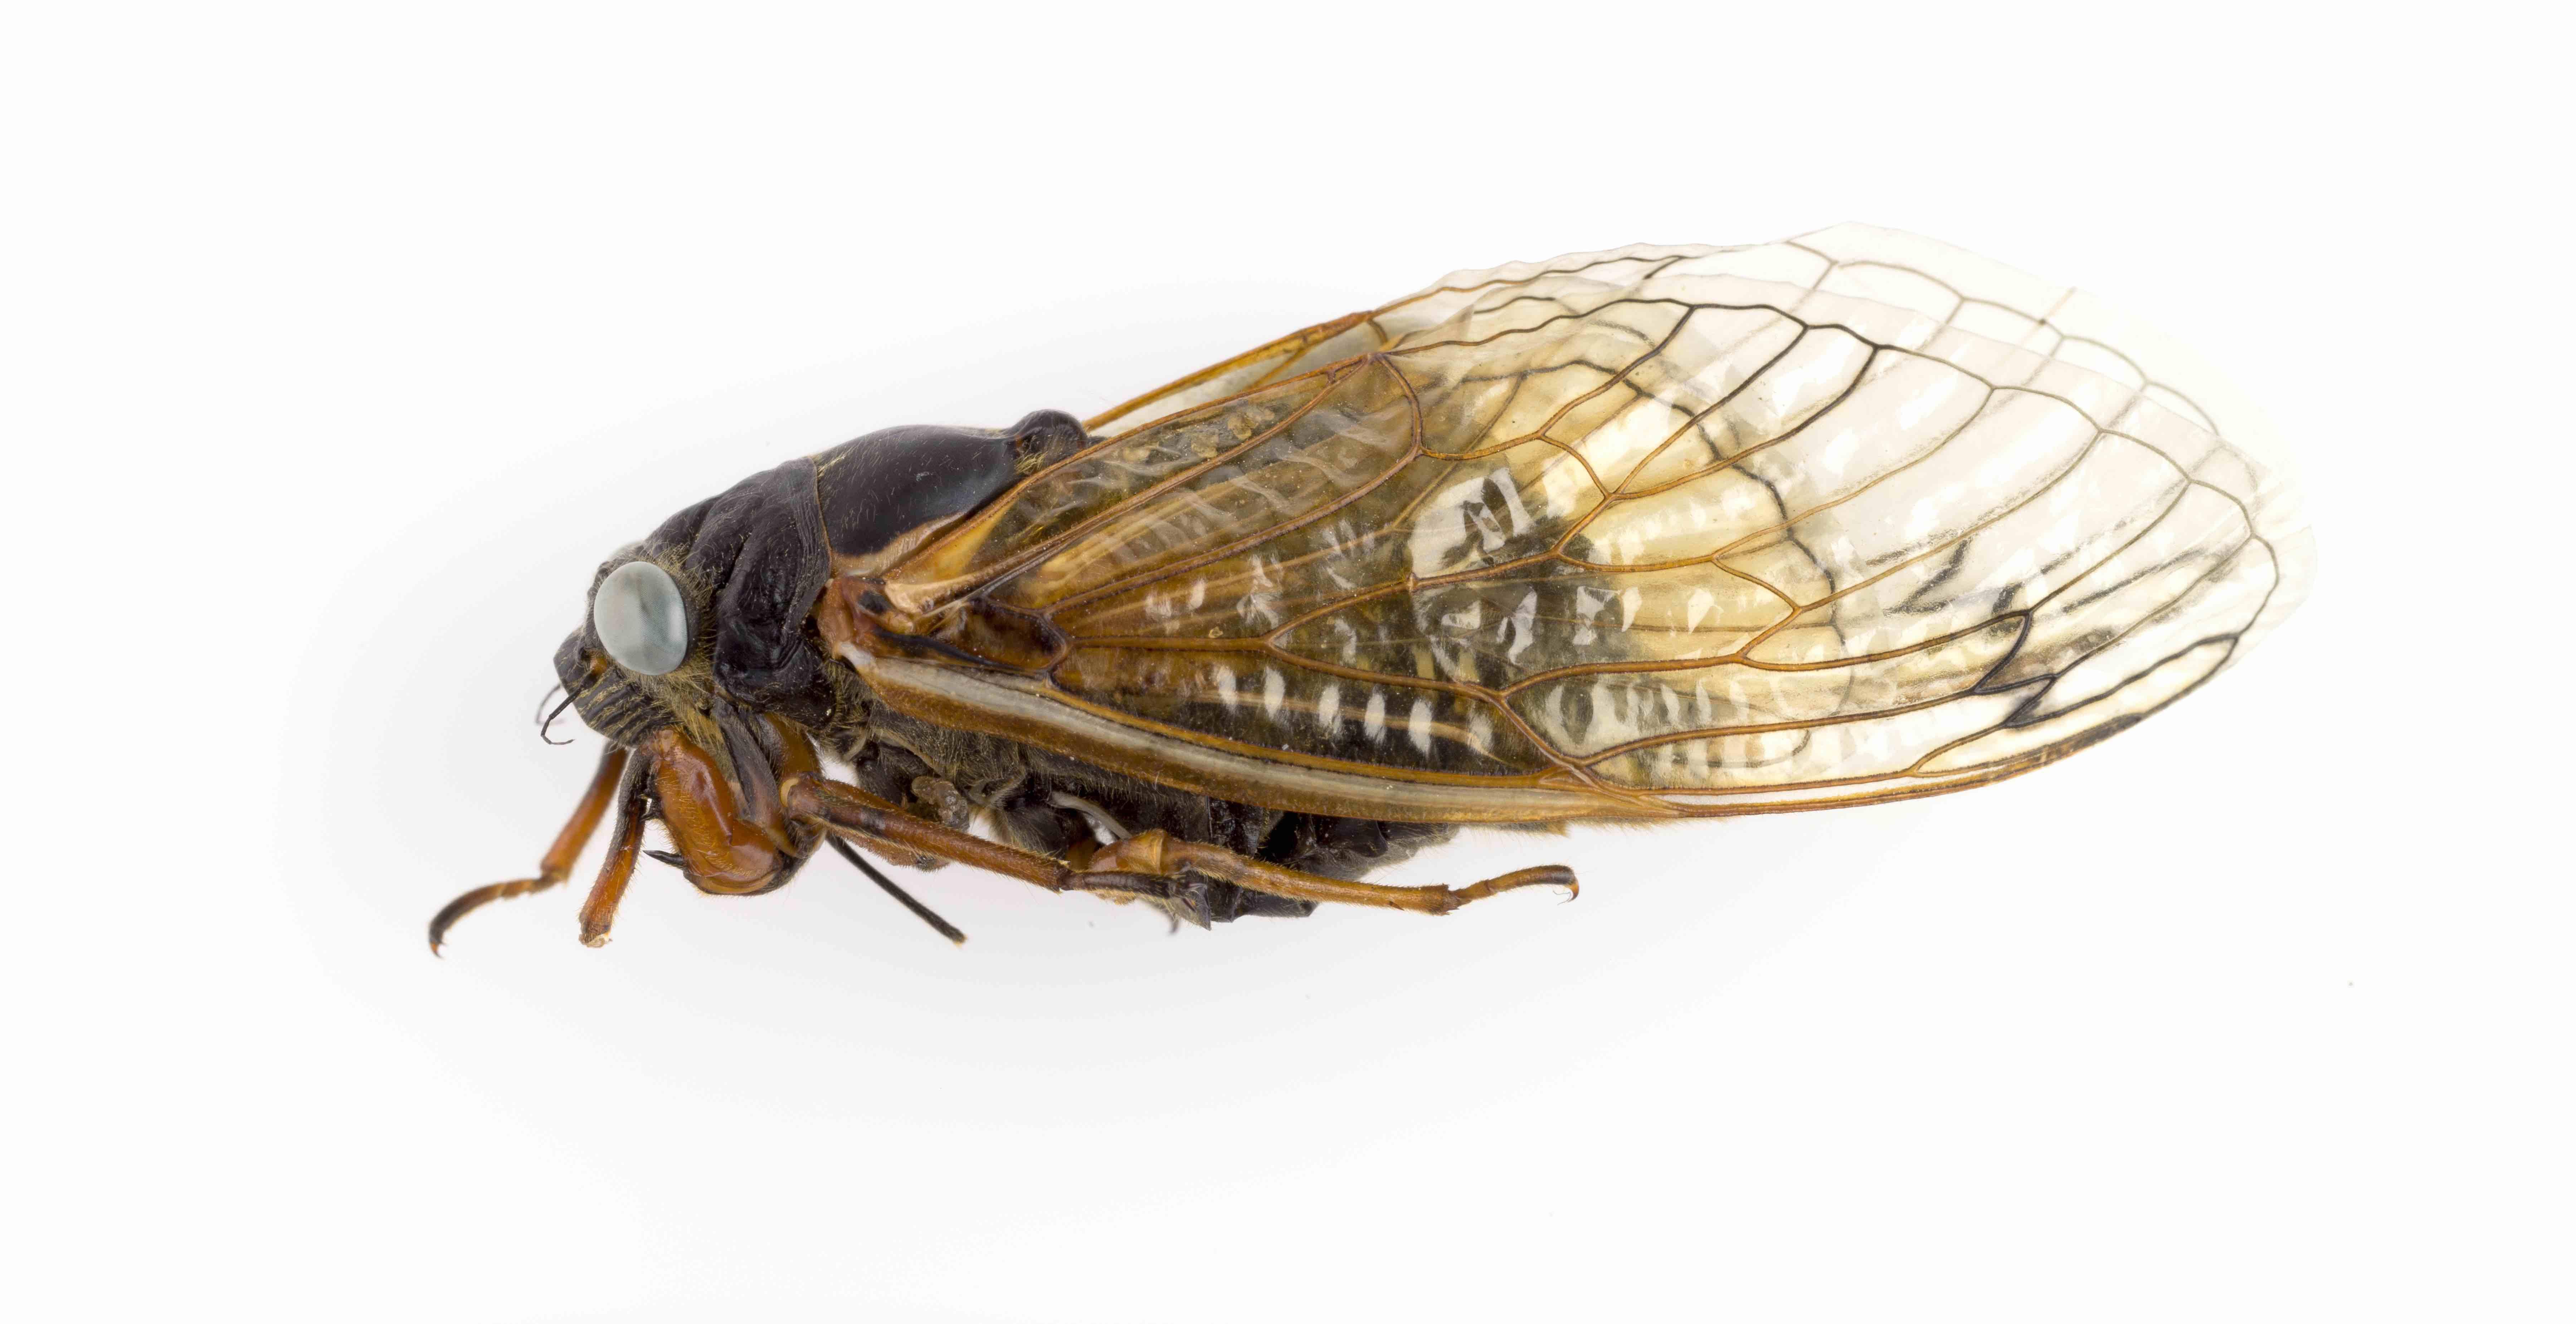 A blue-eyed cicada, donated to the Field Museum. (Daniel Le / Field Museum)